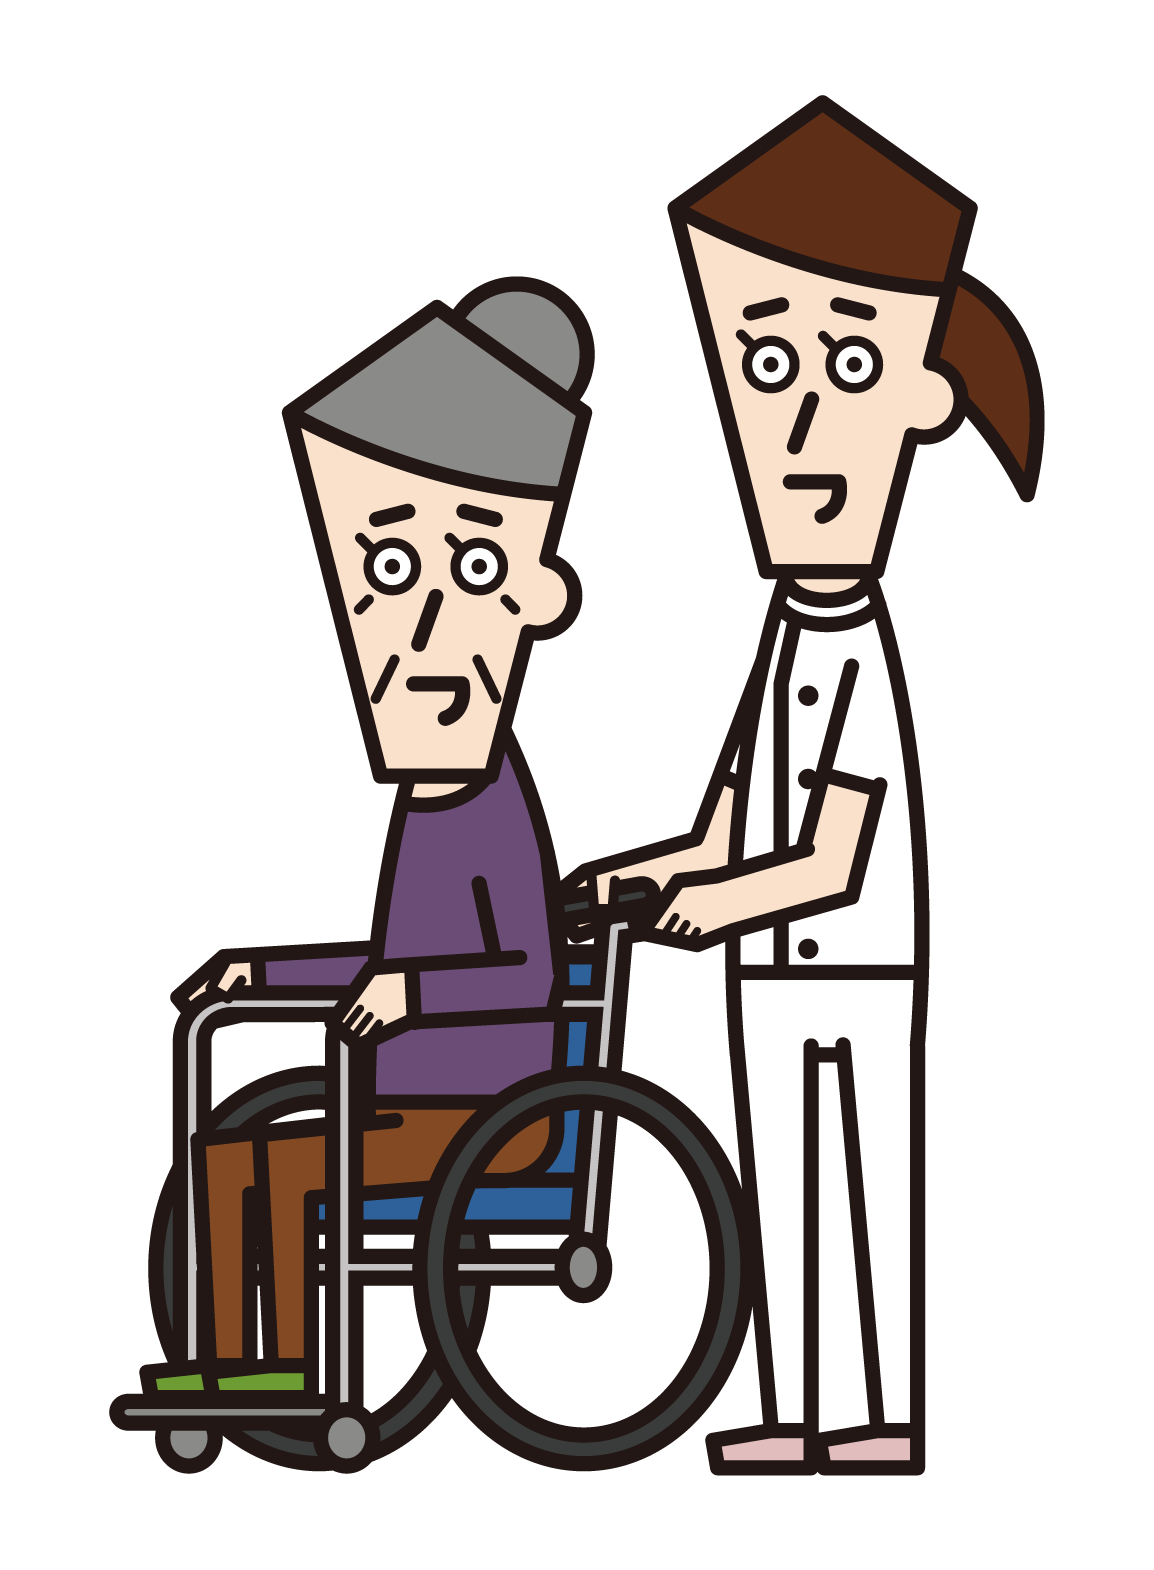 Illustration of a care worker (female) pushing a wheelchair